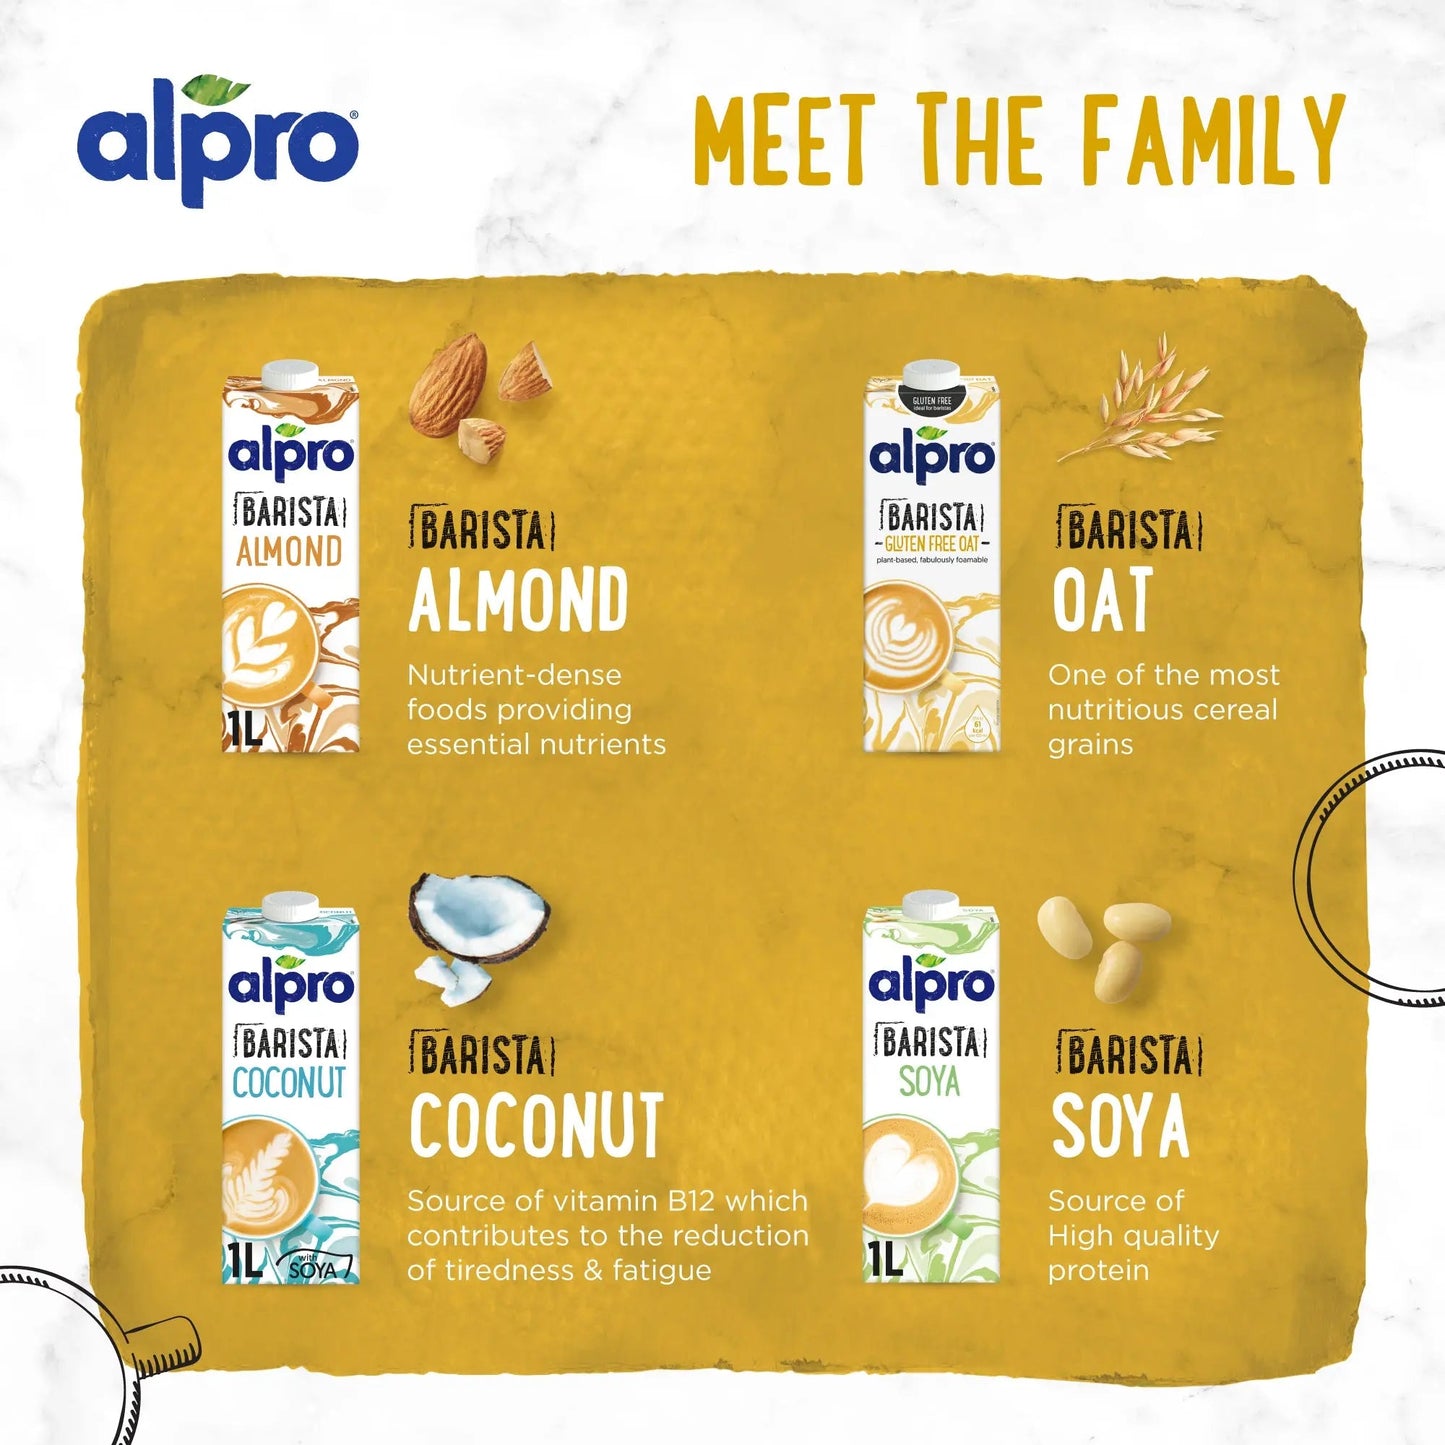 Alpro Gluten Free Oat Barista (1l), 100% Plant Based And Gluten & Dairy Free, Suitable For Vegans, Naturally Free From Lactose, Rich In Nutrients Alpro